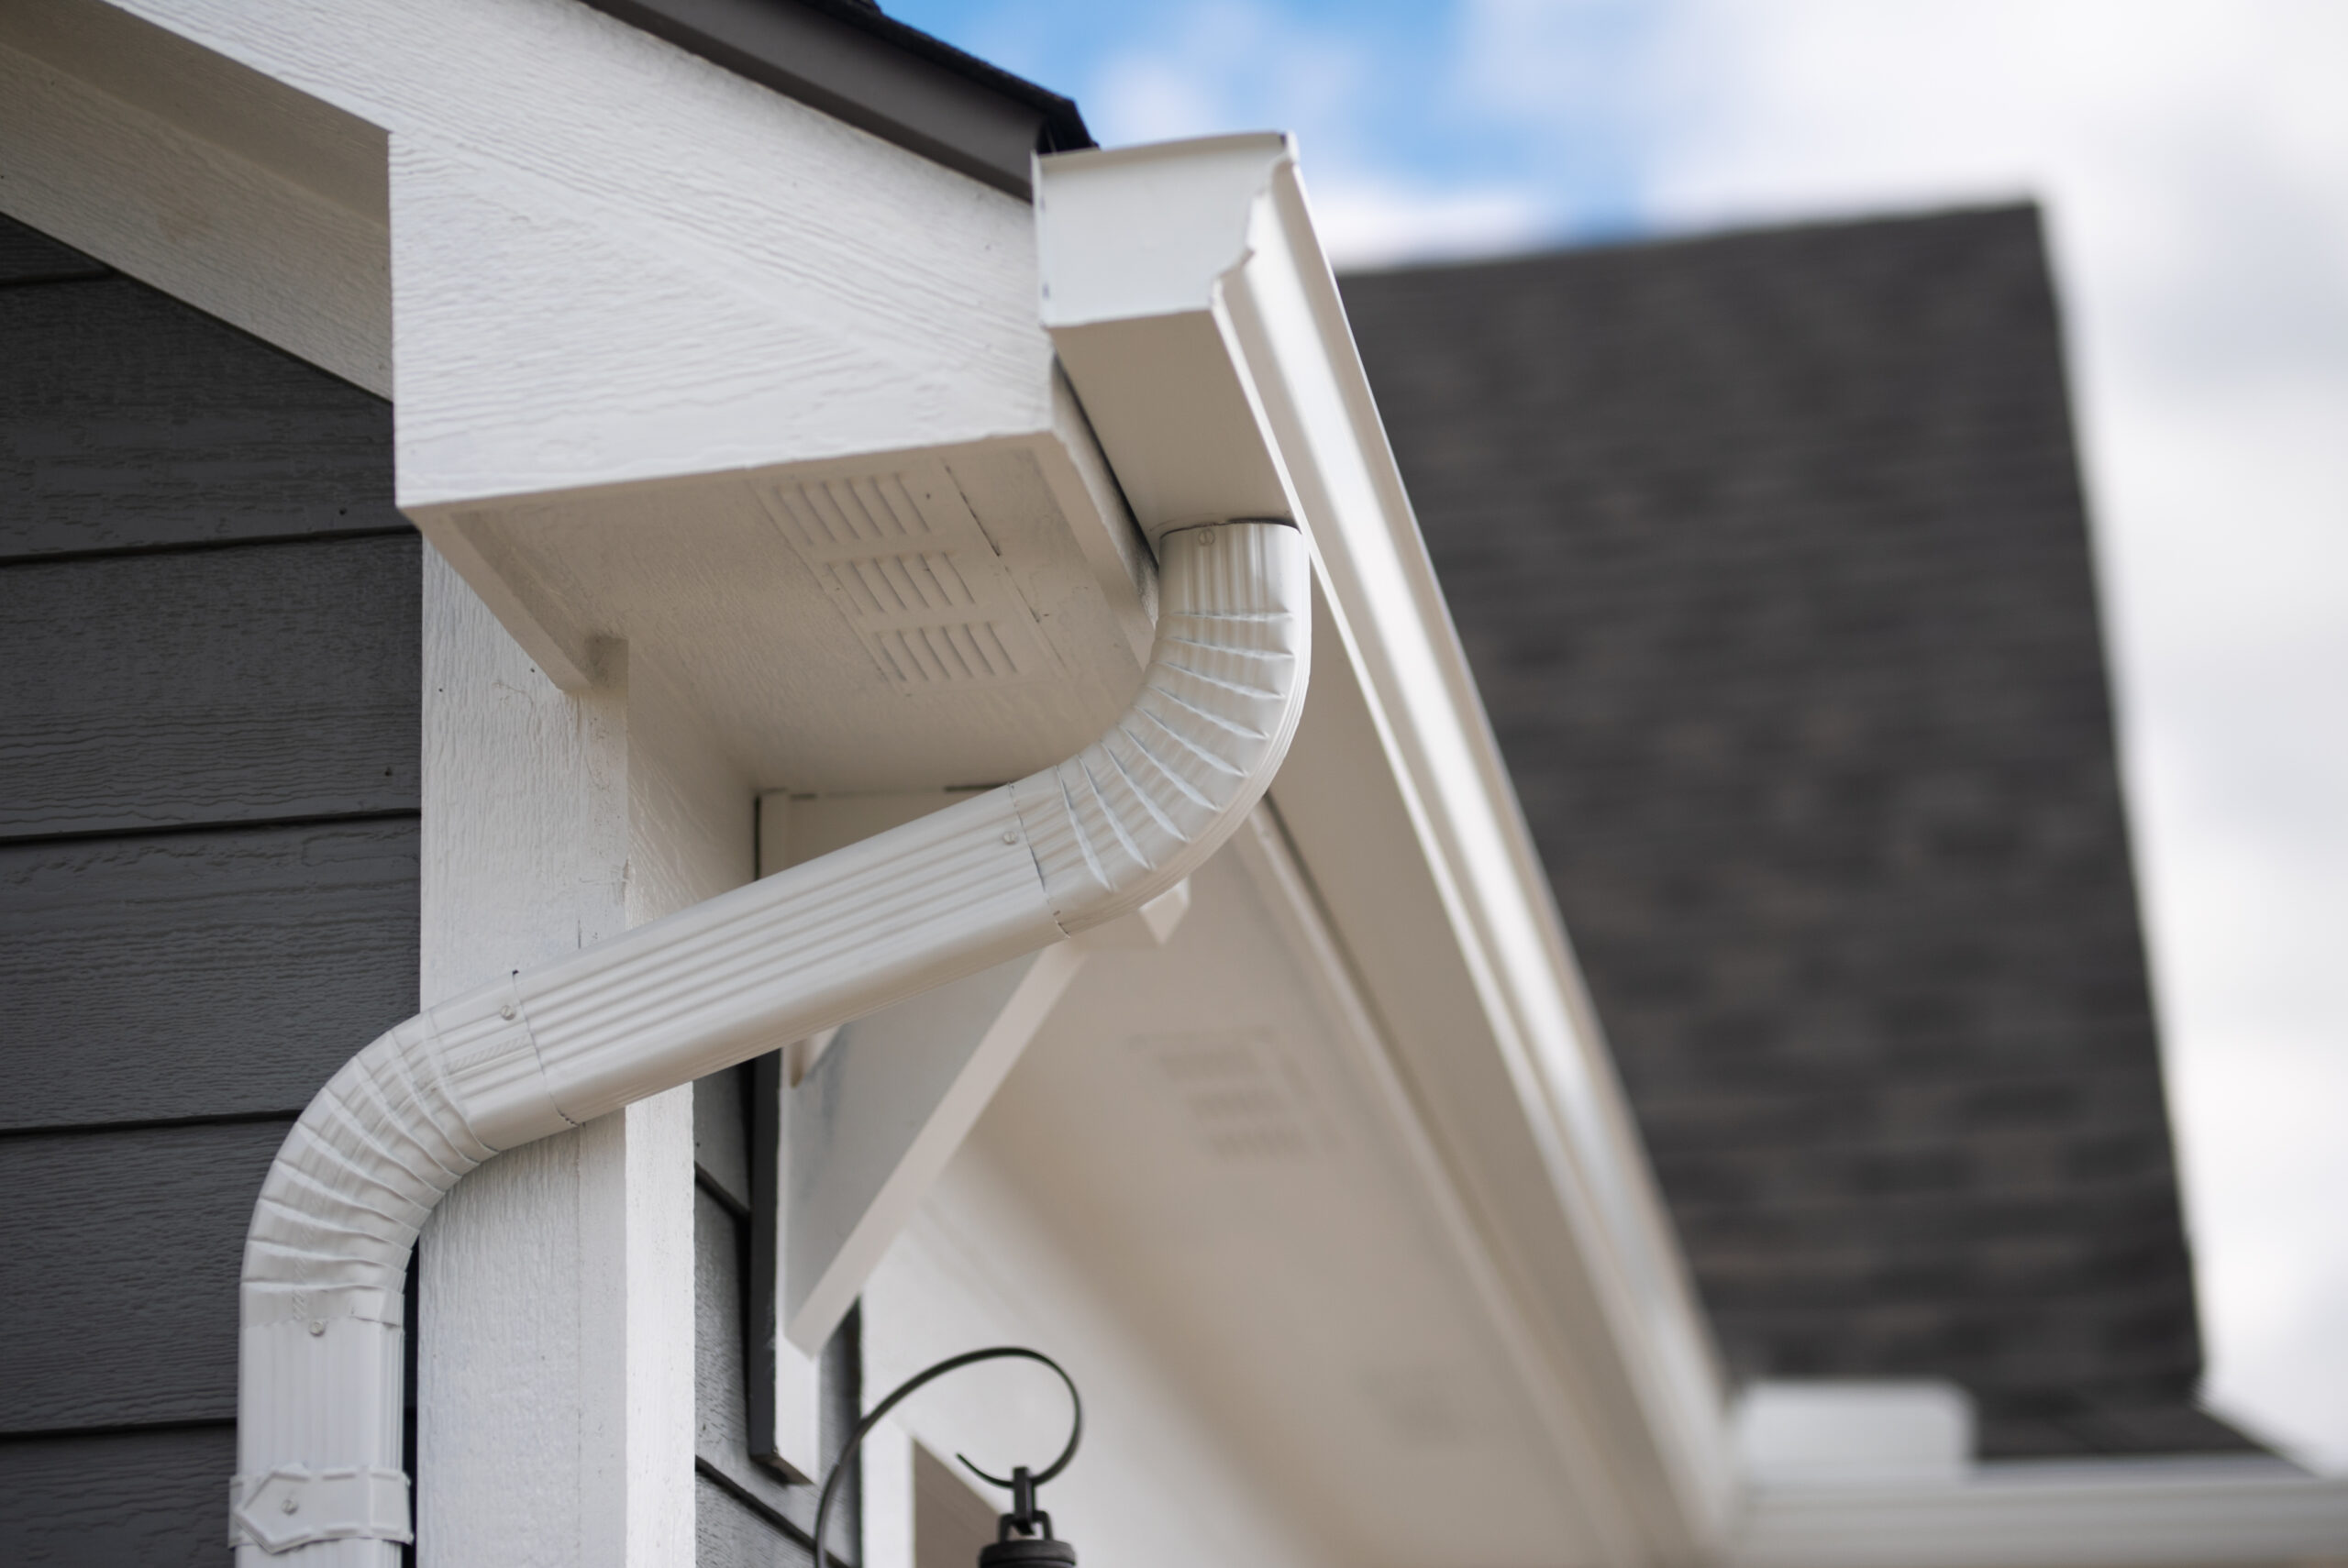 White seamless gutter and downspout at the corner of a home with gray siding.